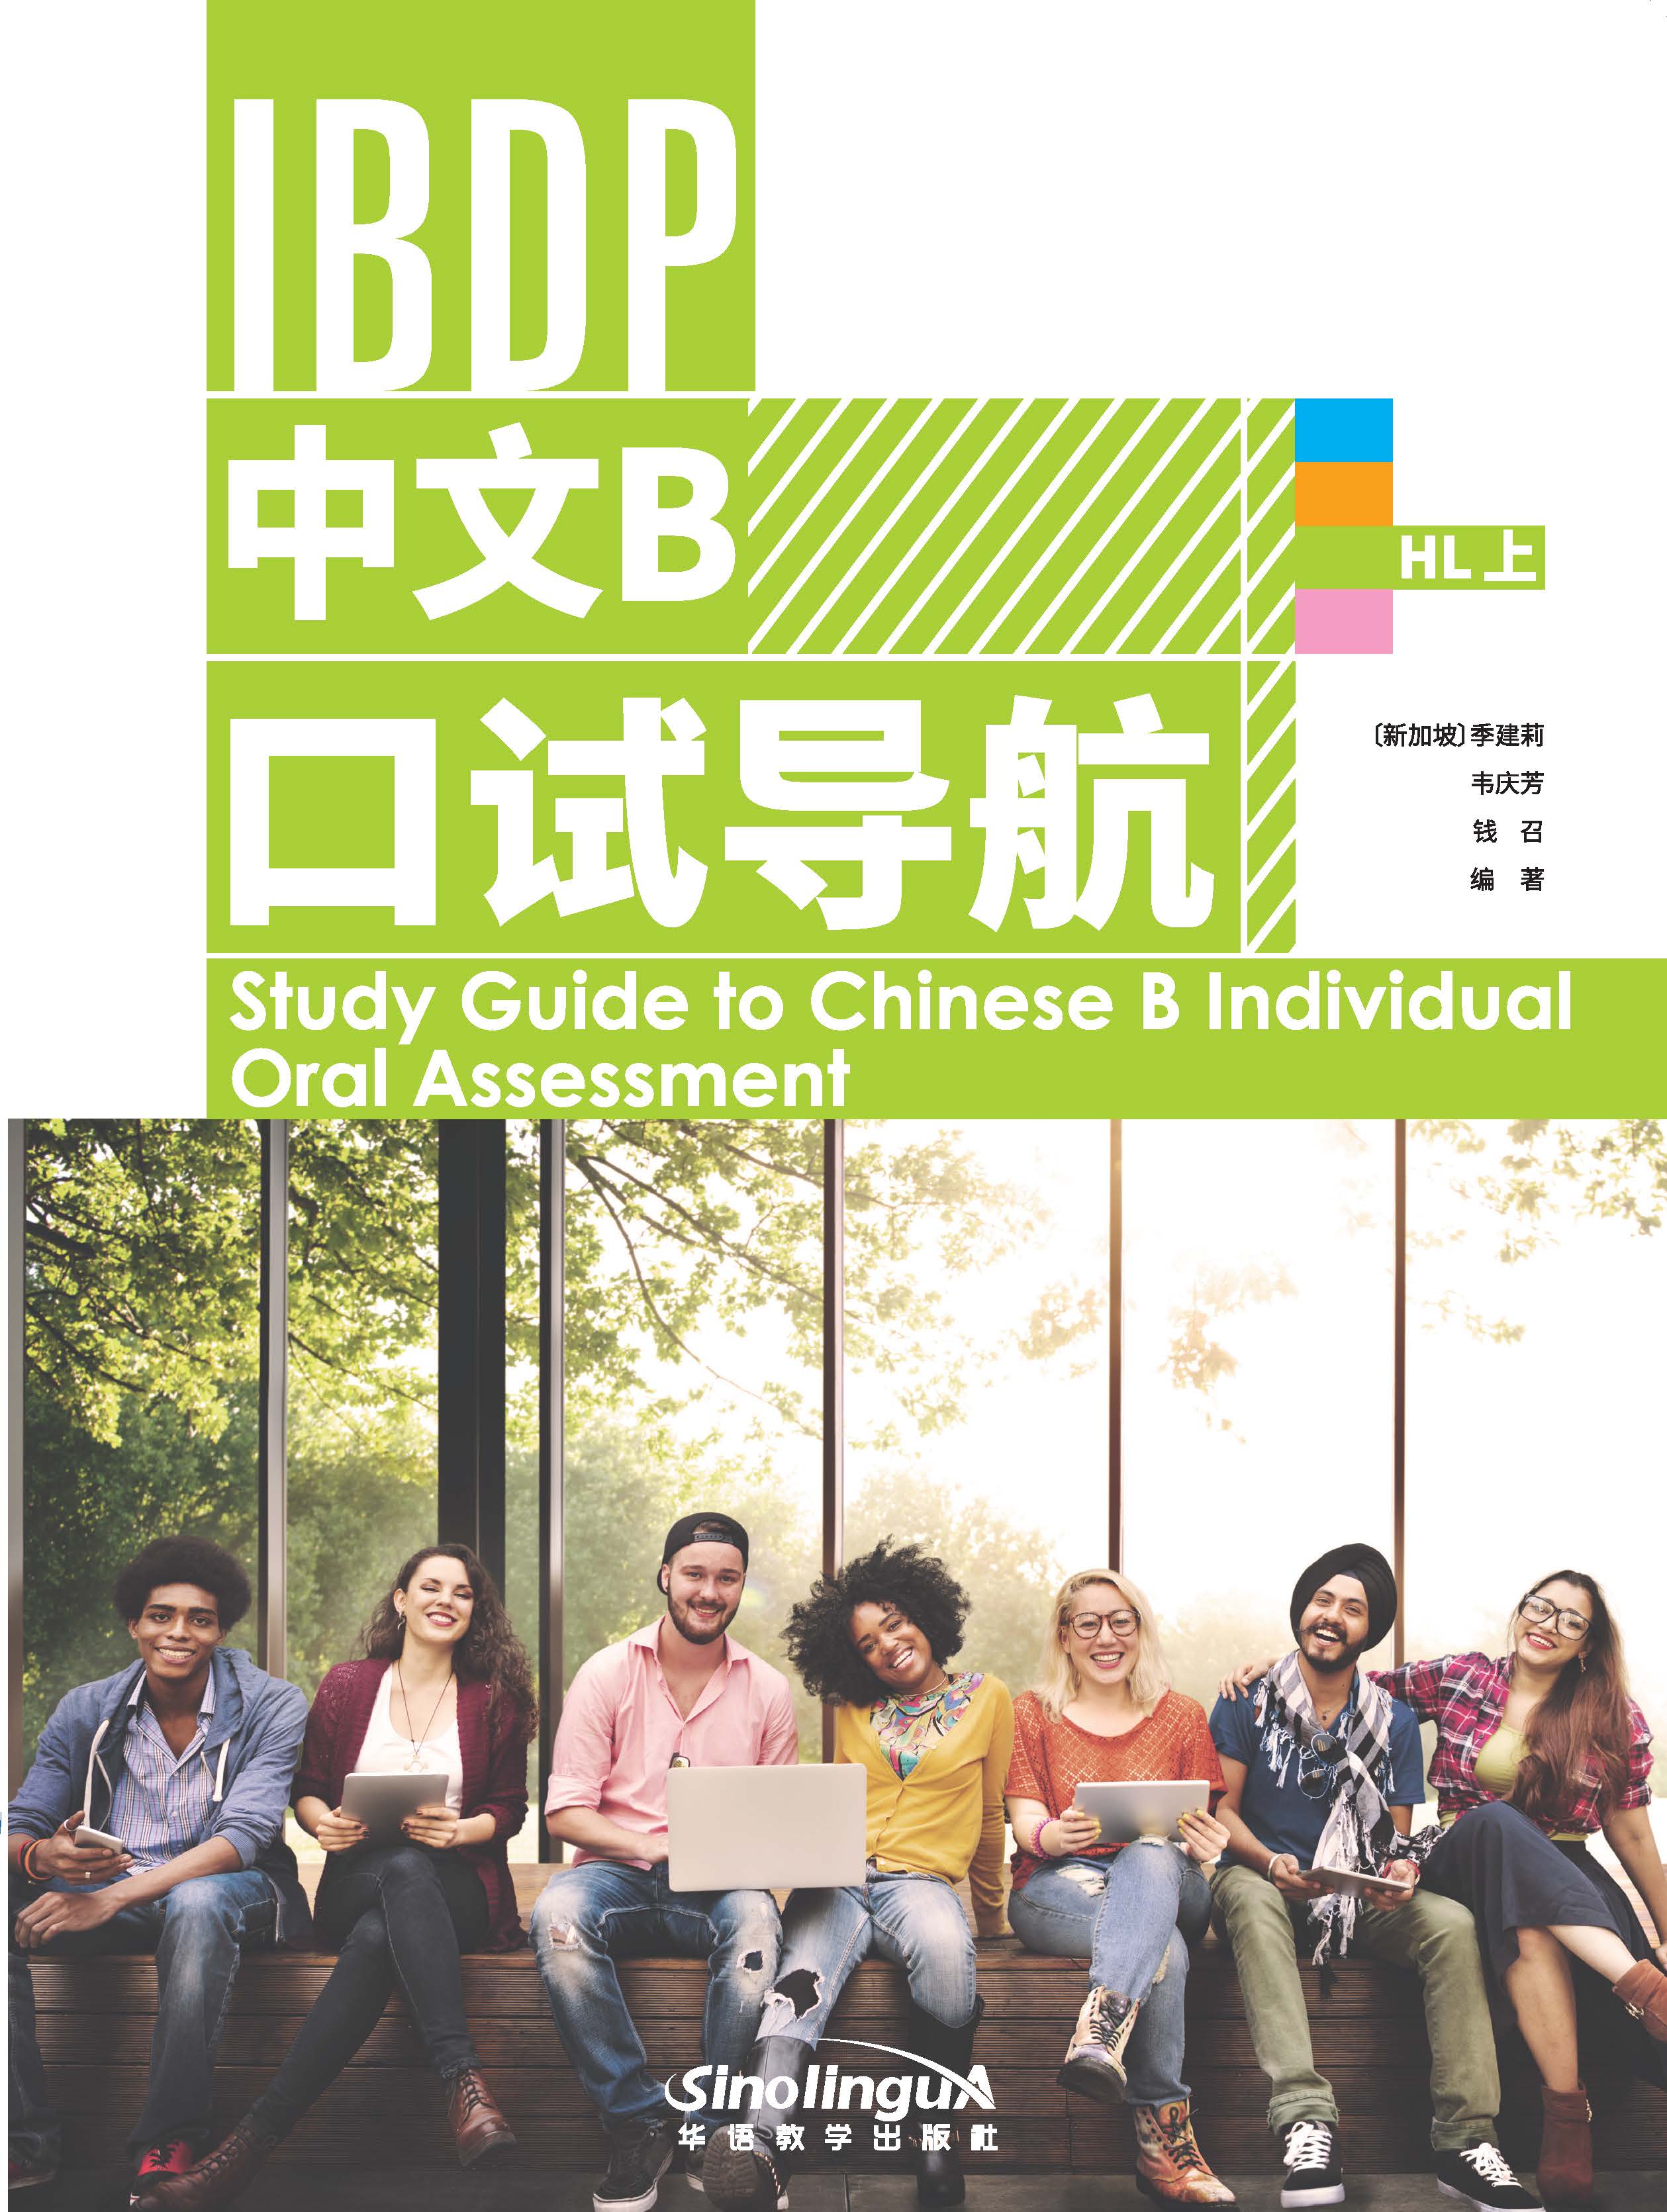 Study Guide to Chinese B Individual Oral Assessment HL 1